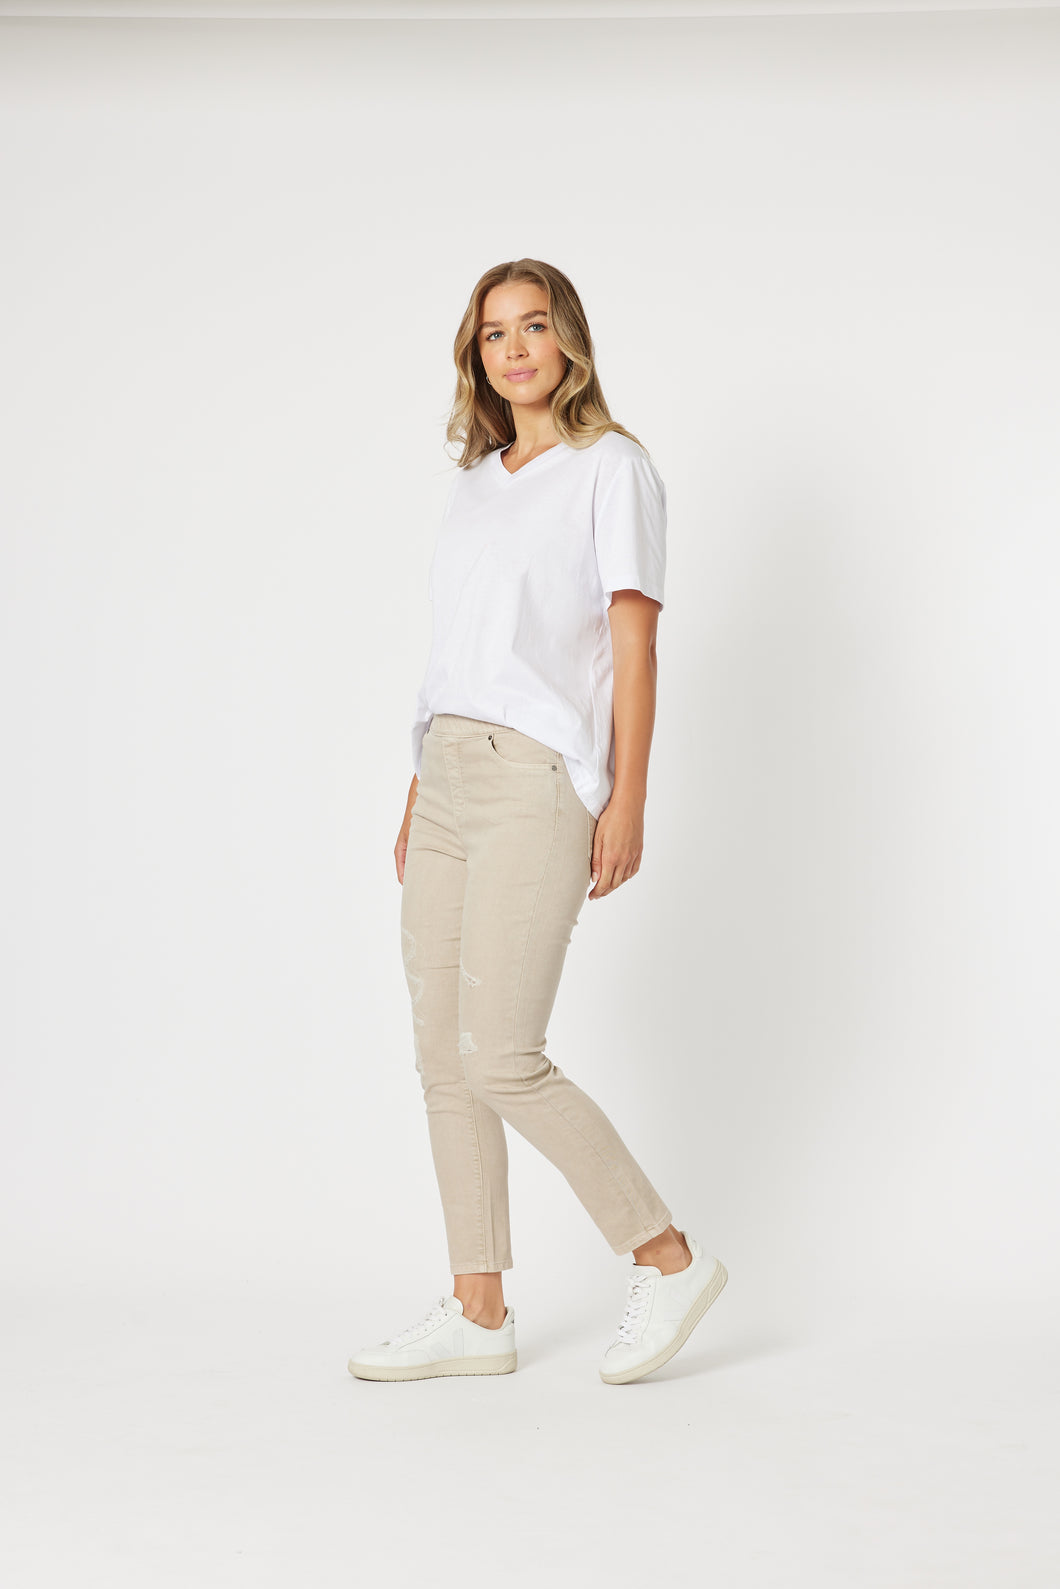 Threadz Pull on Ripped Jean: Natural